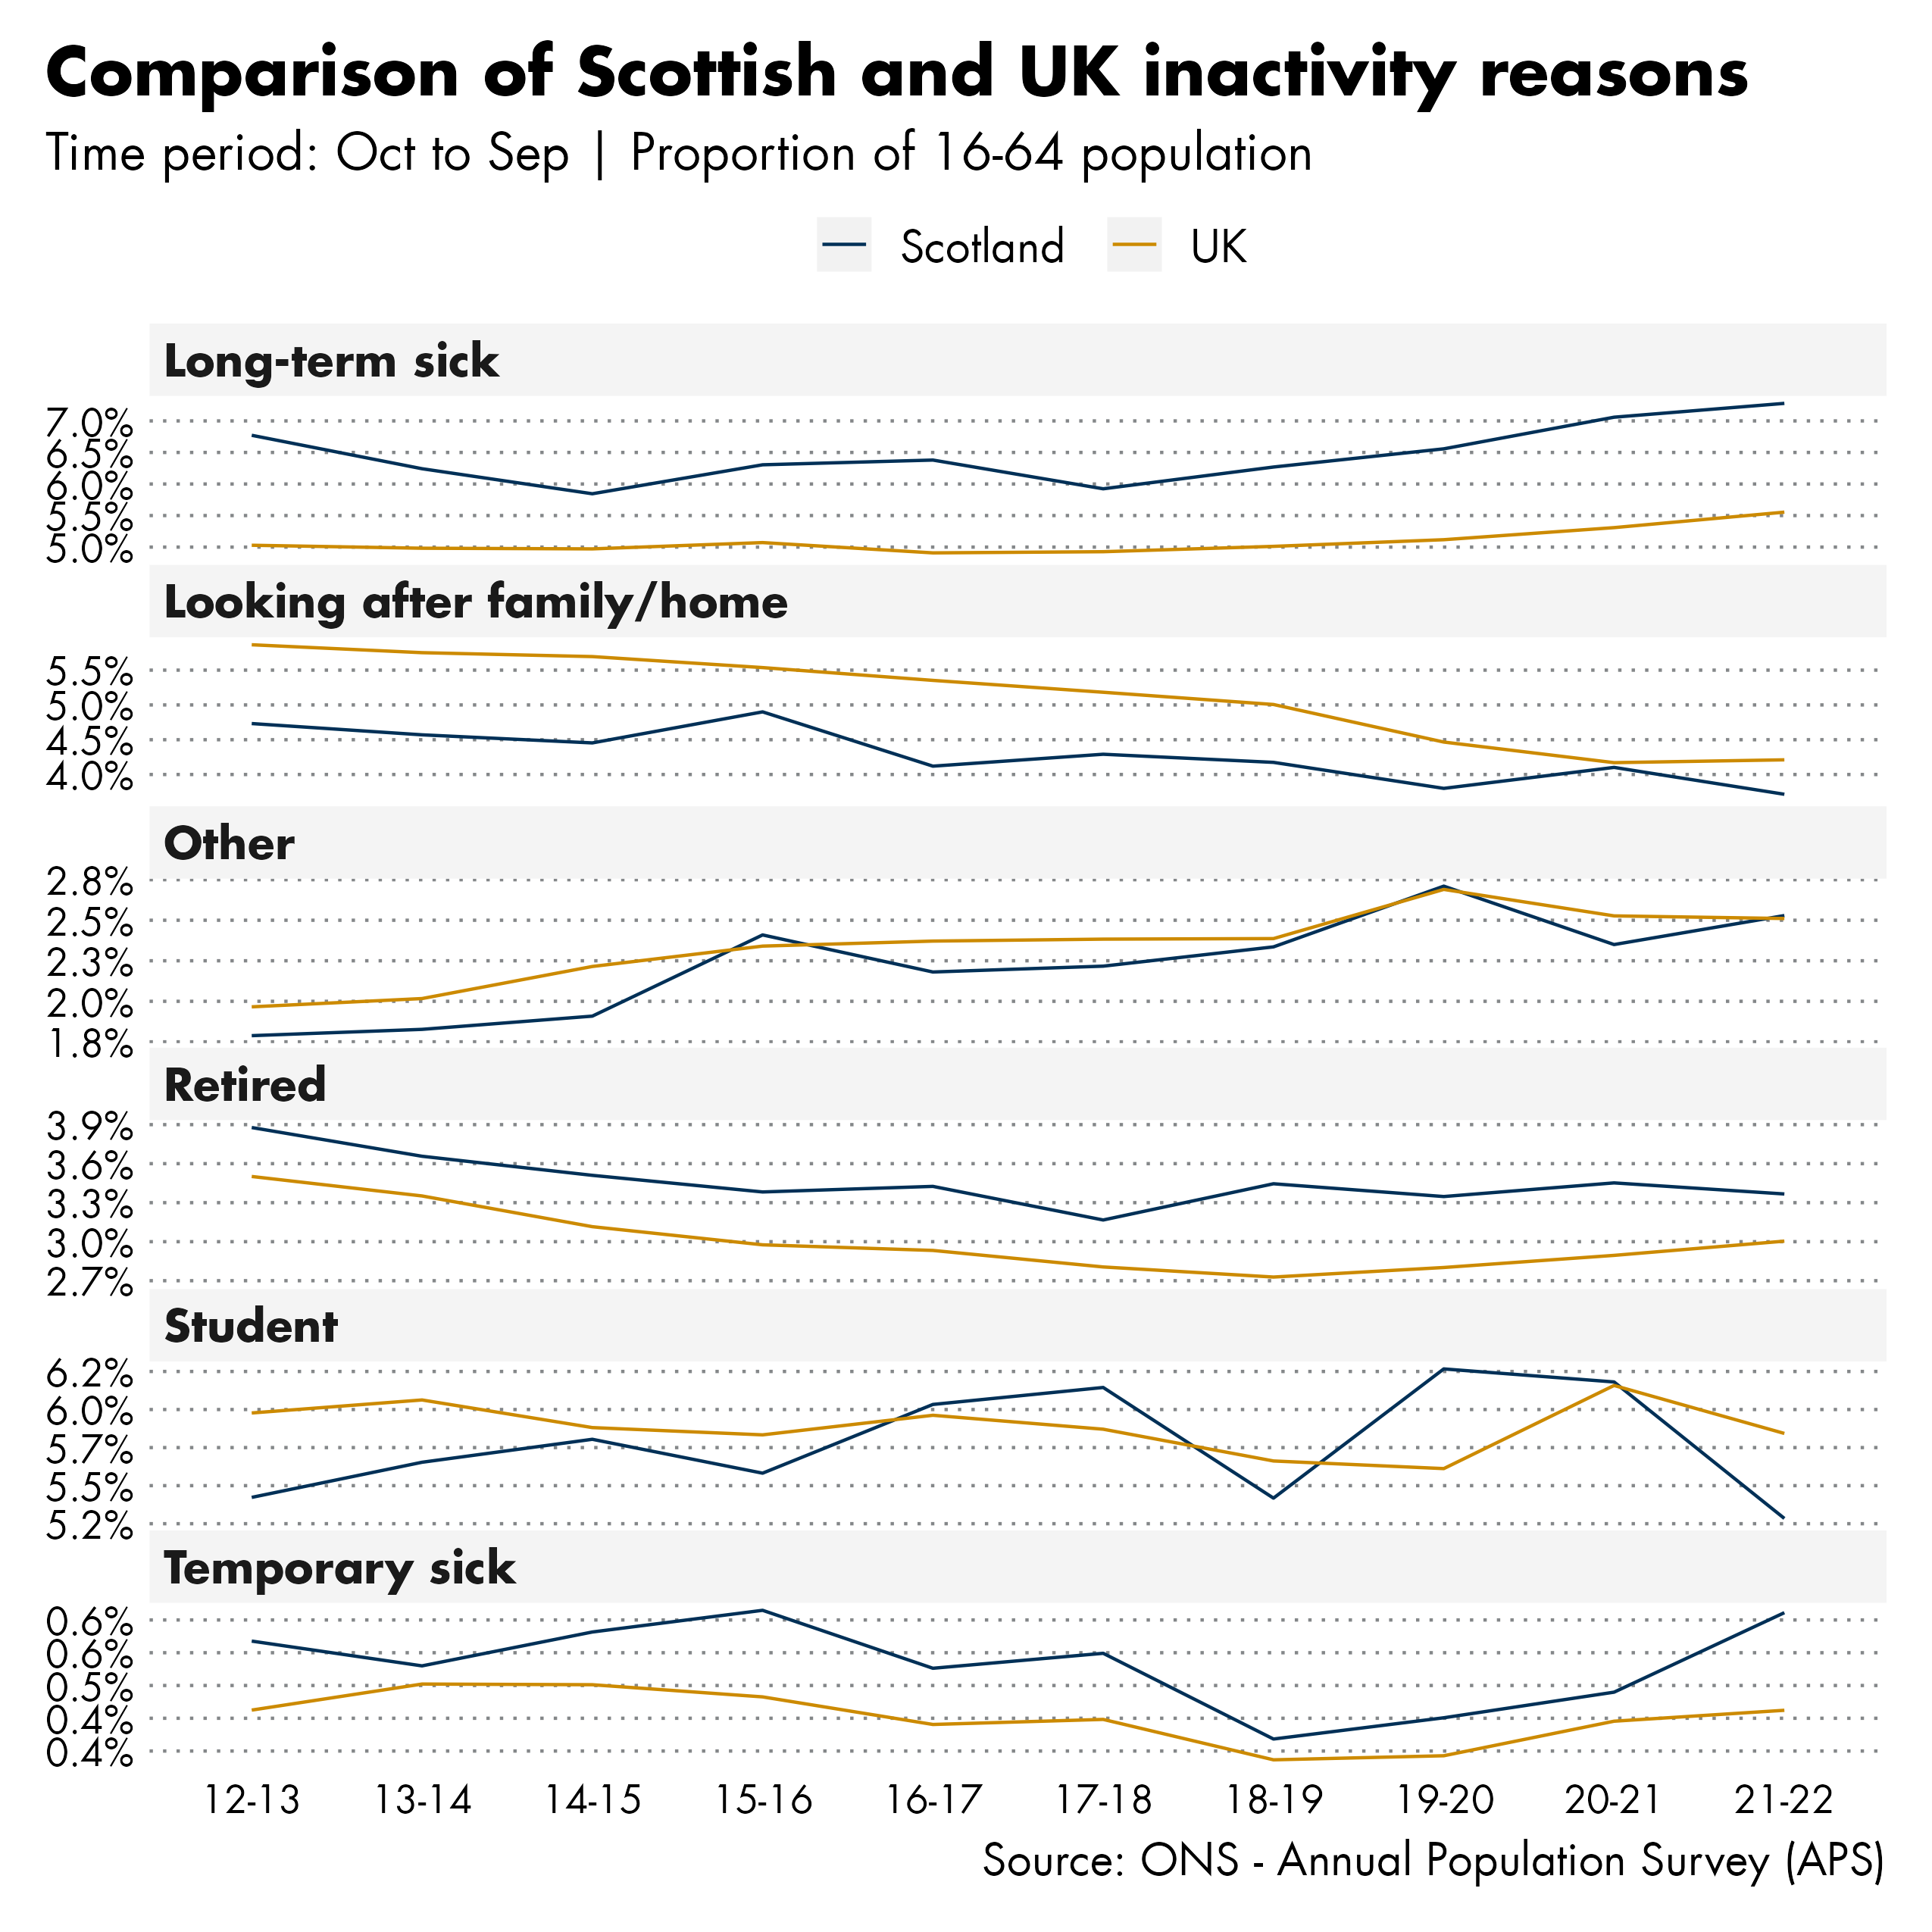 Figure showing the comparison of Scottish and UK inactivity reasons between October to September 2012-13 and October to September 2021-22.